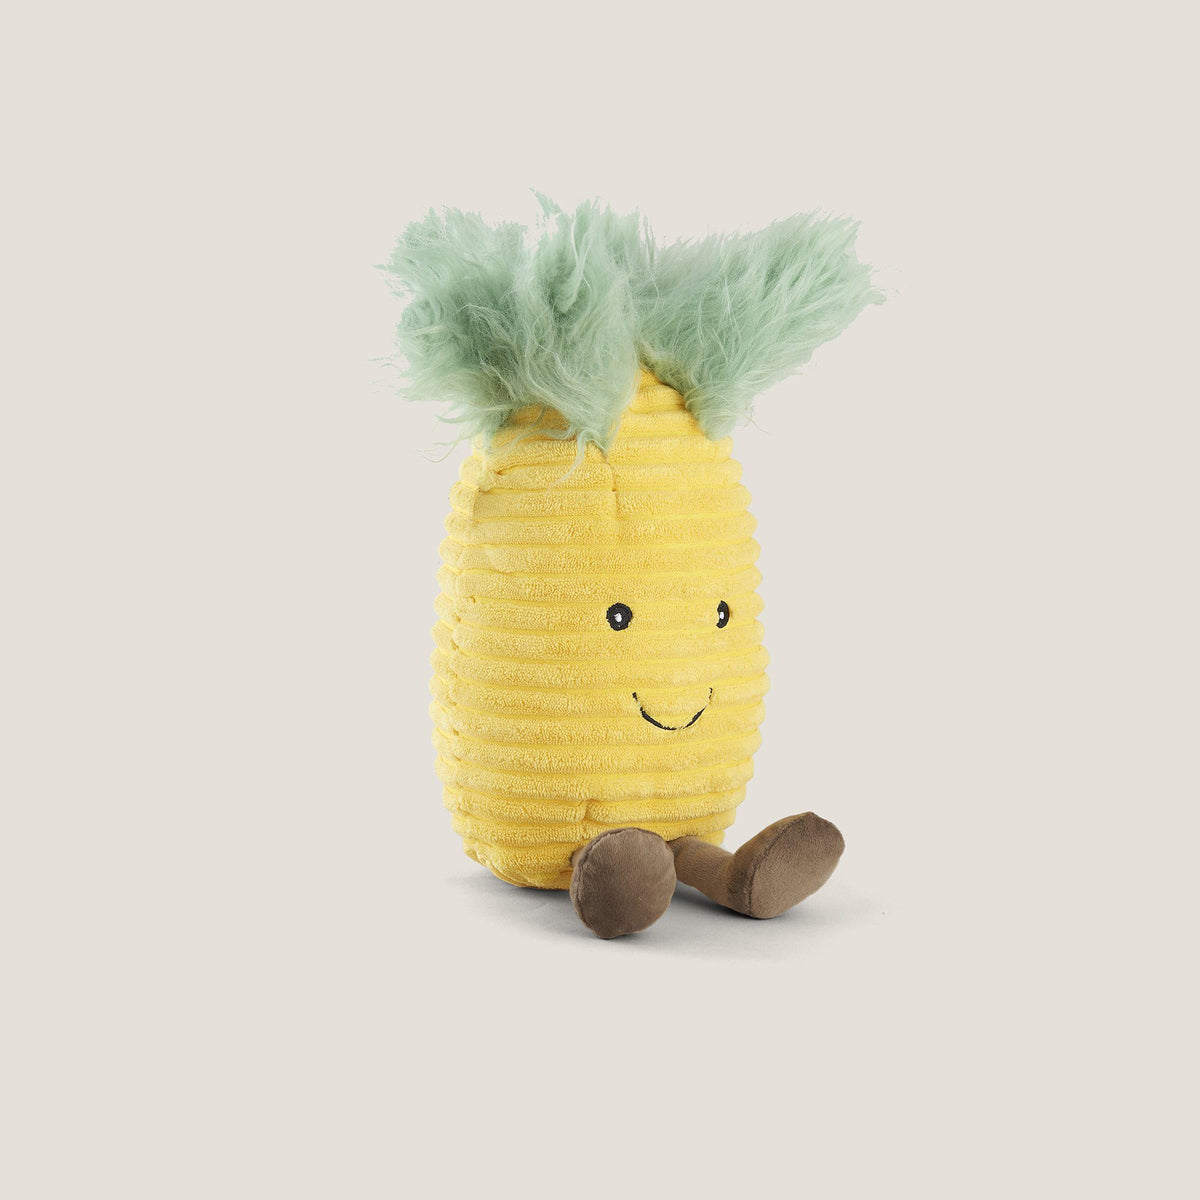 Stripped Pineapple Toy